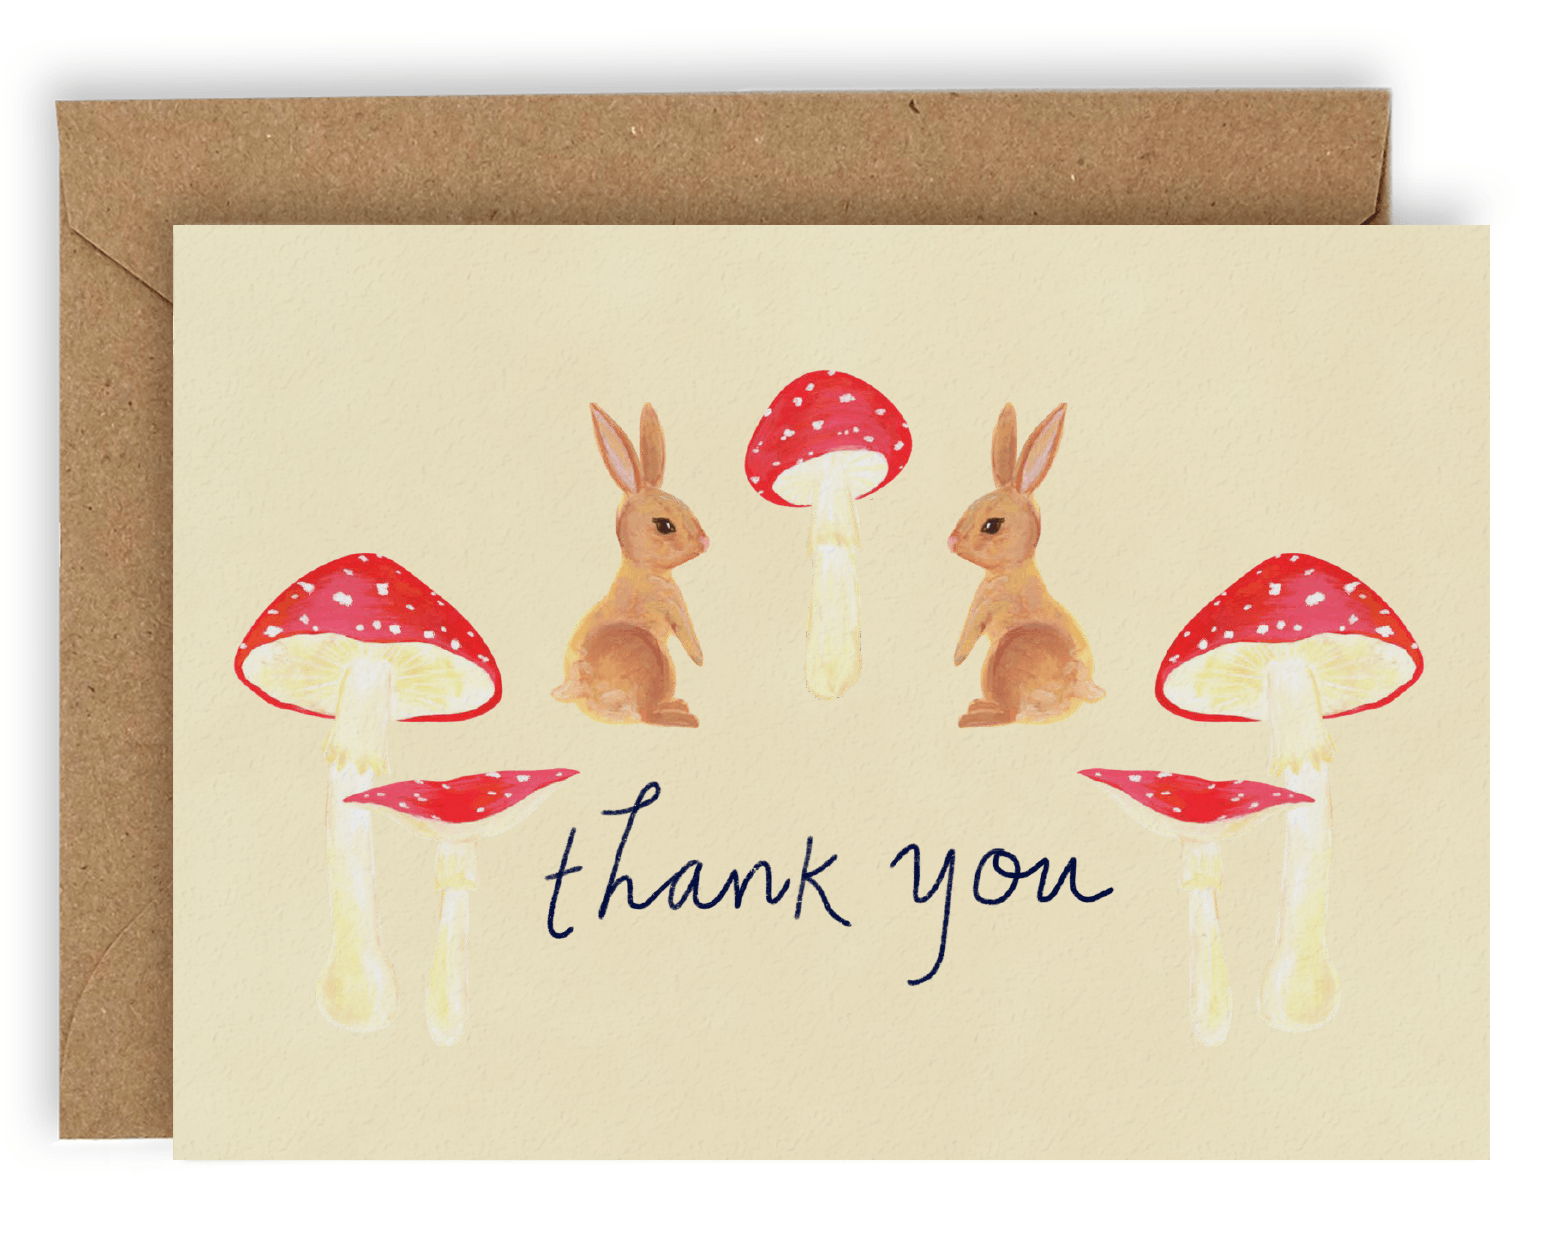 Our new Forest Creatures design! This card features two light brown/dirty blonde rabbits facing each other with a red magic mushroom between them and two red mushrooms on either side of the words "Thank You" printed in black ink on a cream background. Shown with Kraft envelope.